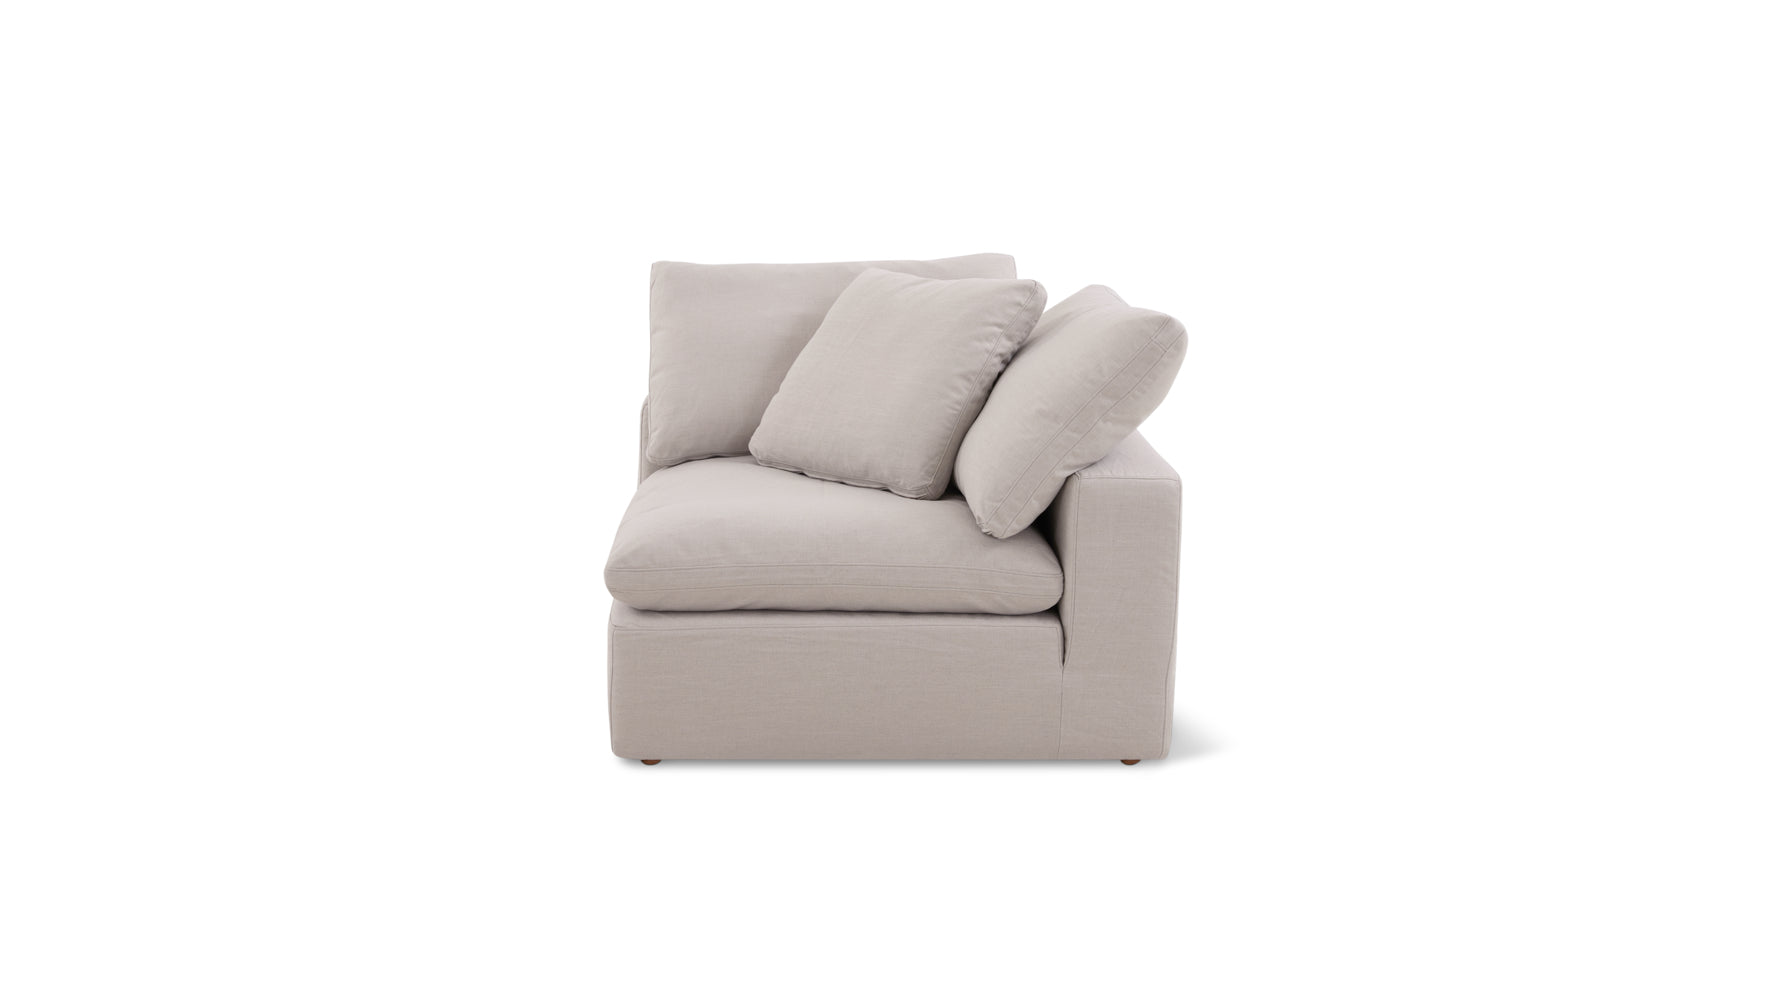 Slipcover - Movie Night™ Corner Chair, Standard, Clay (Left Or Right) - Image 1